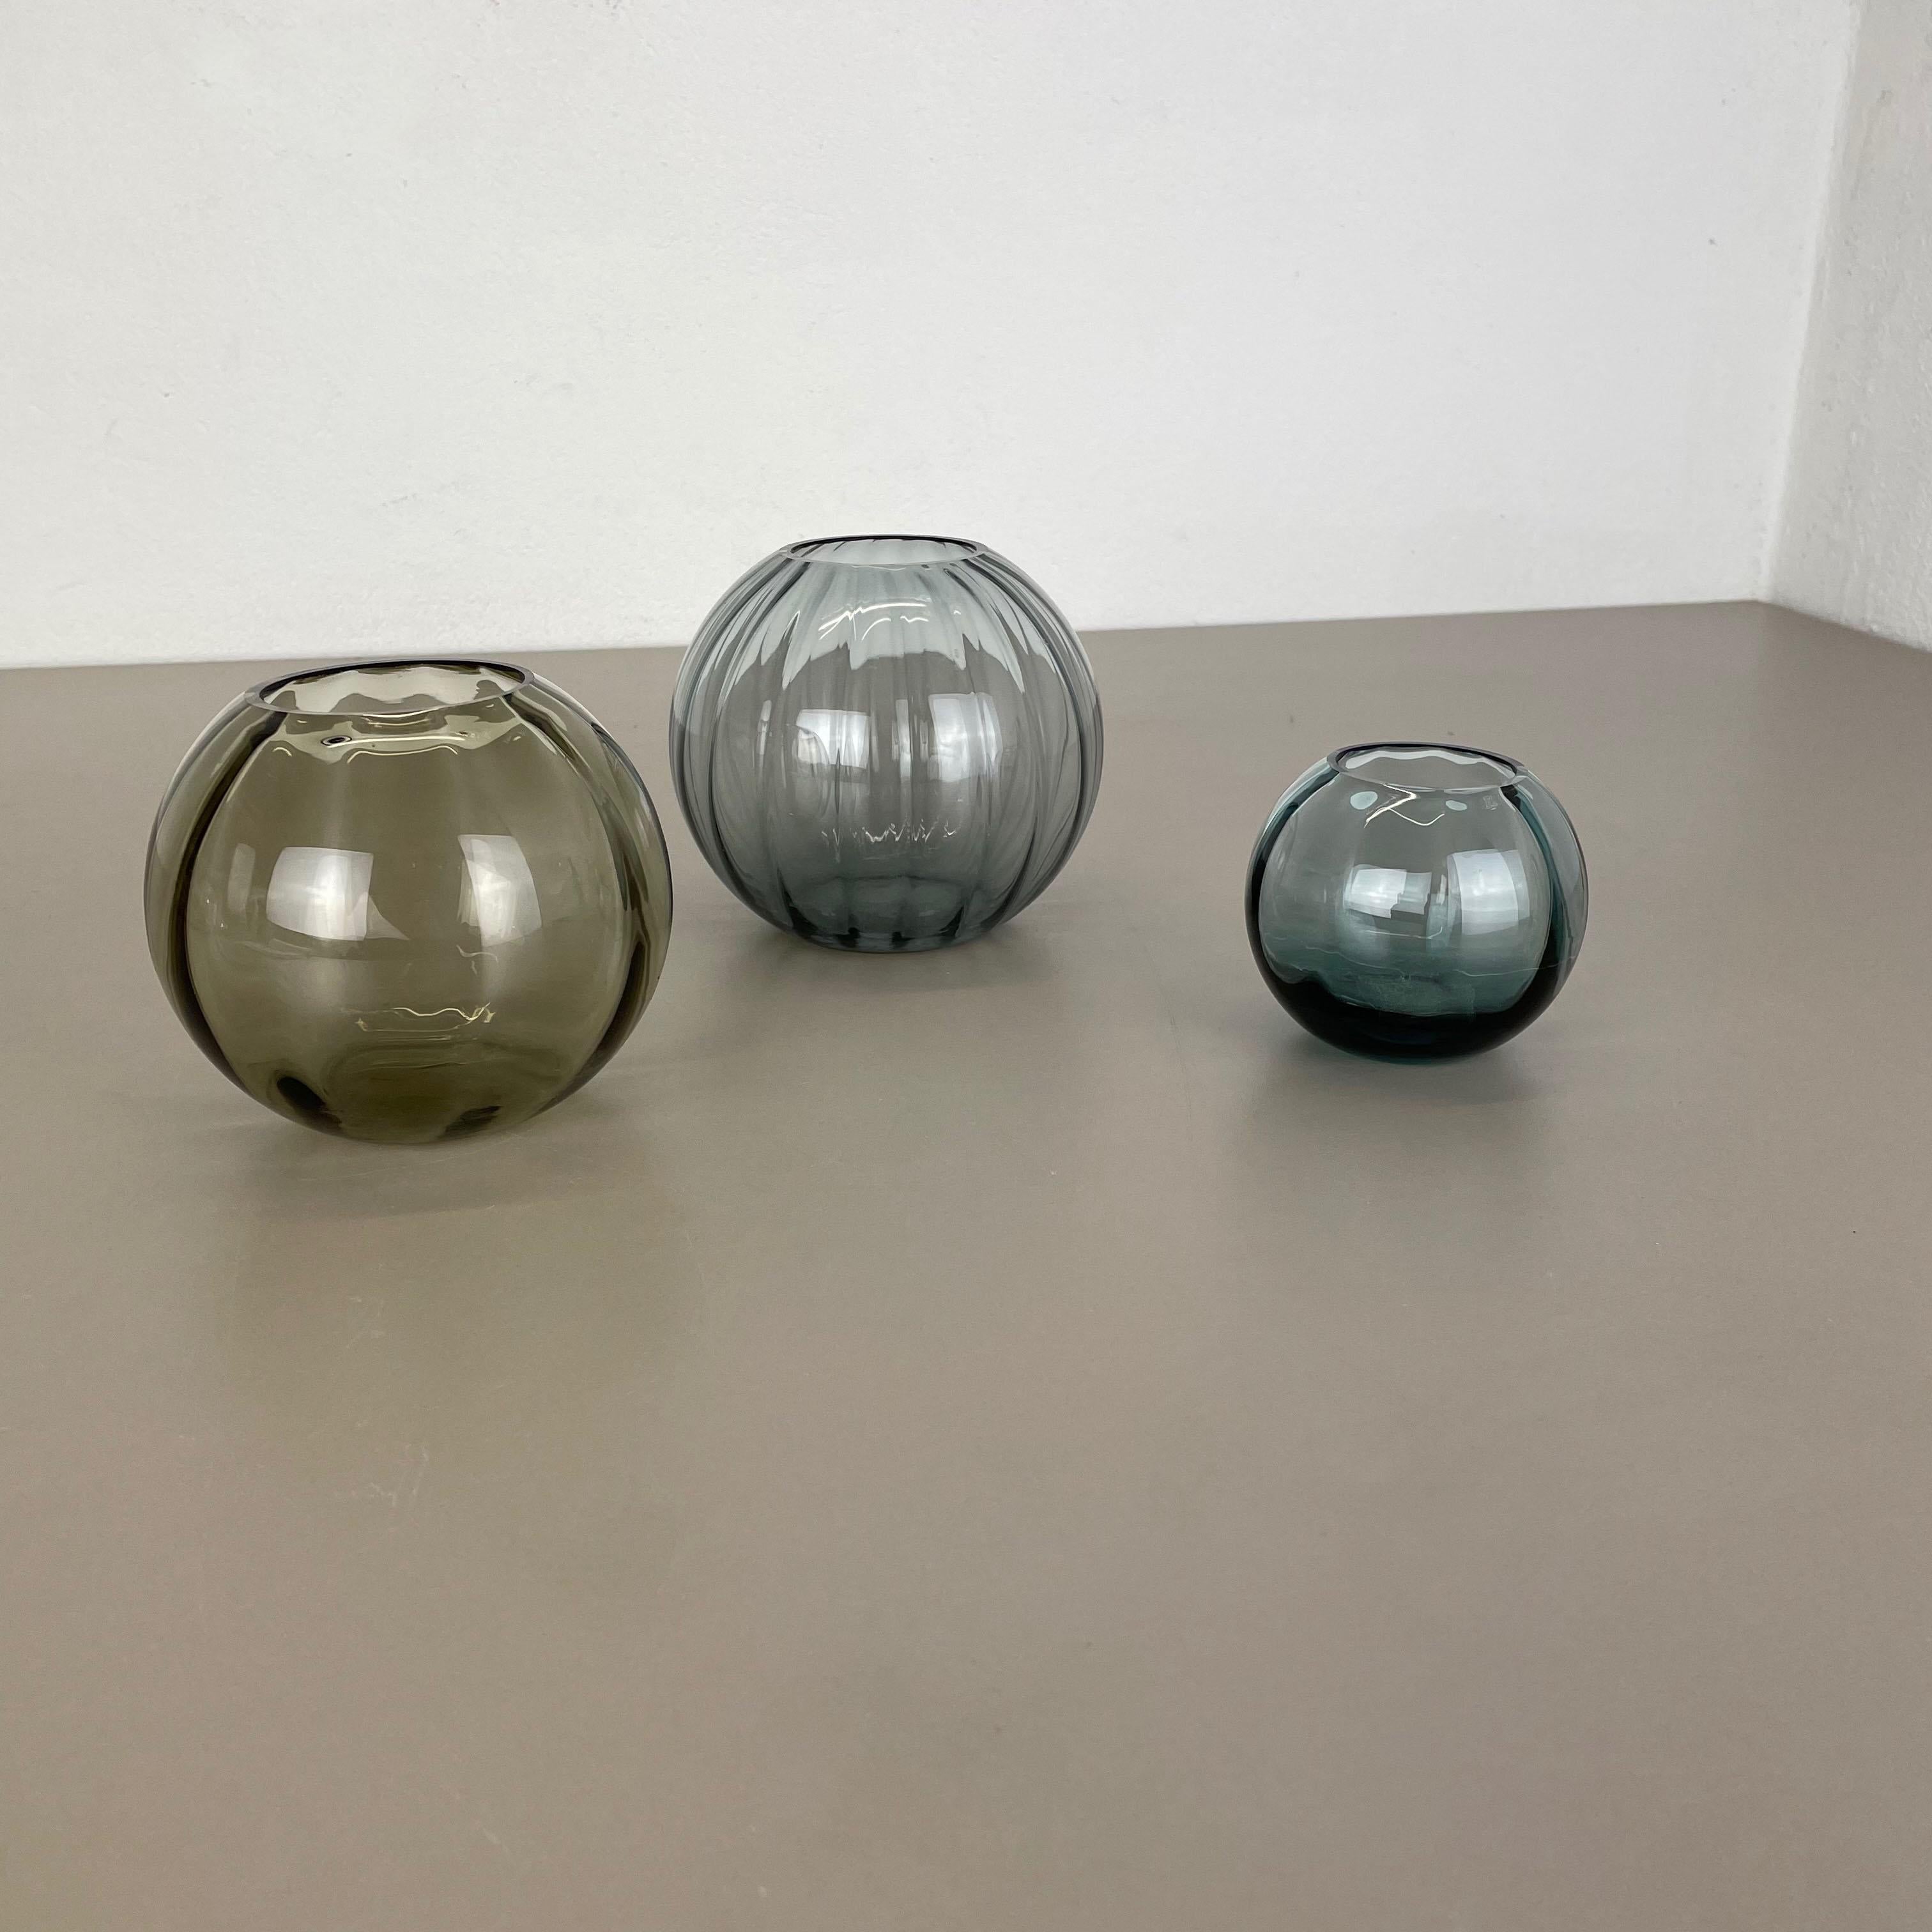 Mid-Century Modern Vintage 1960s Set of 3 Ball Vases Turmaline by Wilhelm Wagenfeld for WMF Germany For Sale